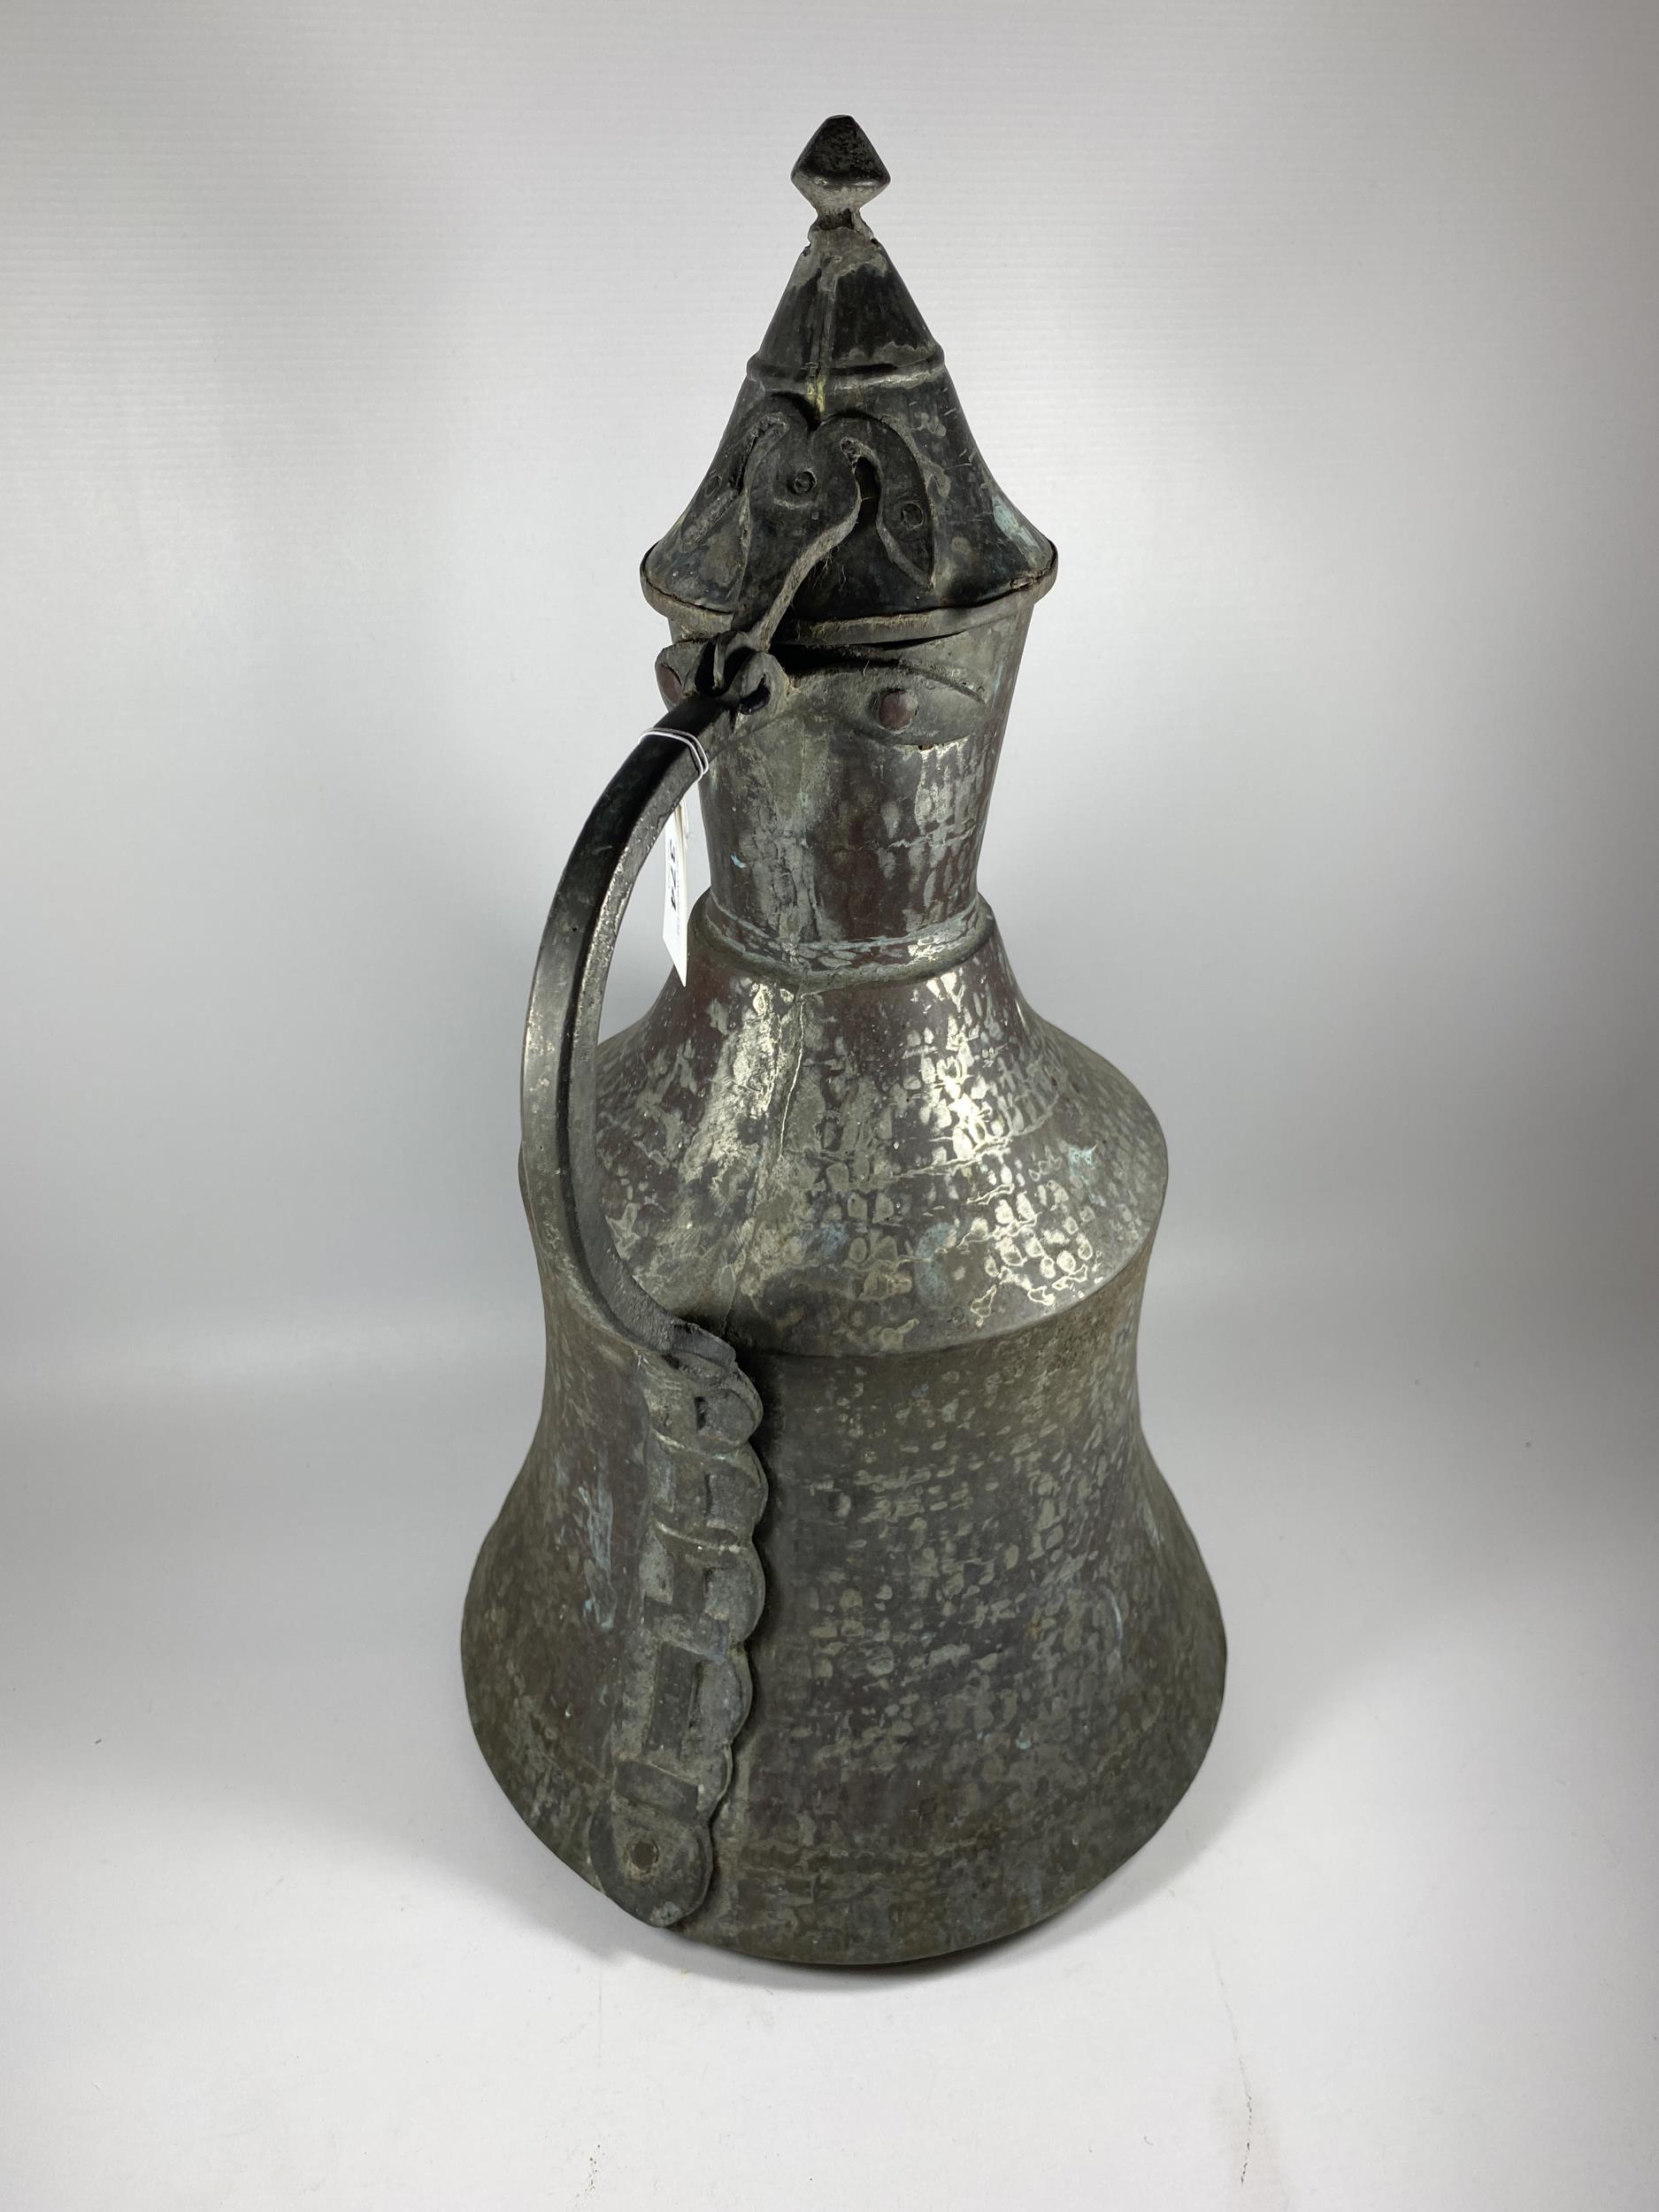 A LARGE LATE 19TH / EARLY 20TH CENTURY MIDDLE EASTERN COPPER WATER VESSEL, HEIGHT 50CM - Image 3 of 3